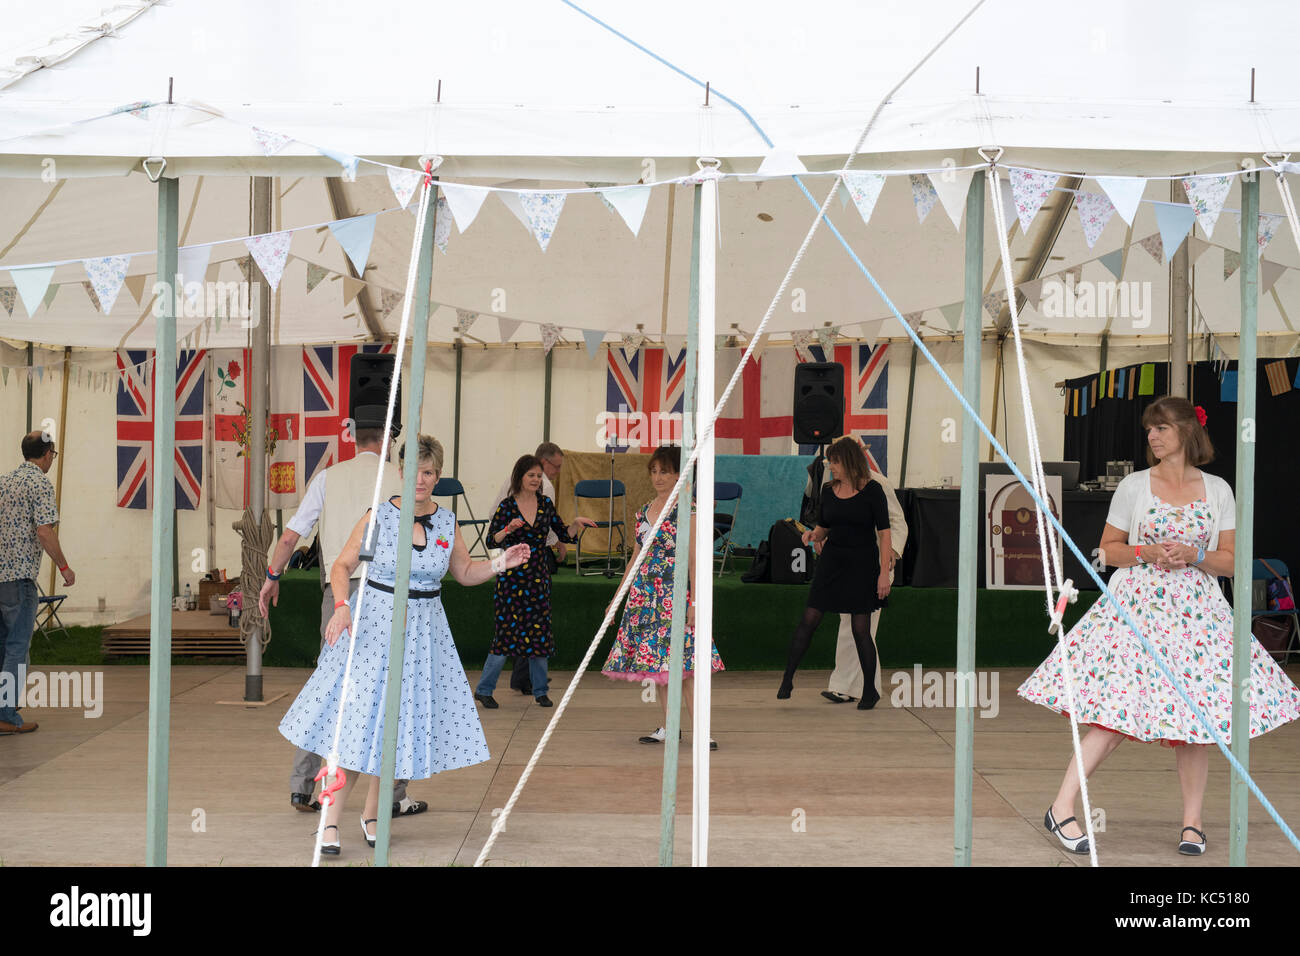 People dancing in the vintage dance tent at Malvern autumn show, Worcestershire, UK Stock Photo